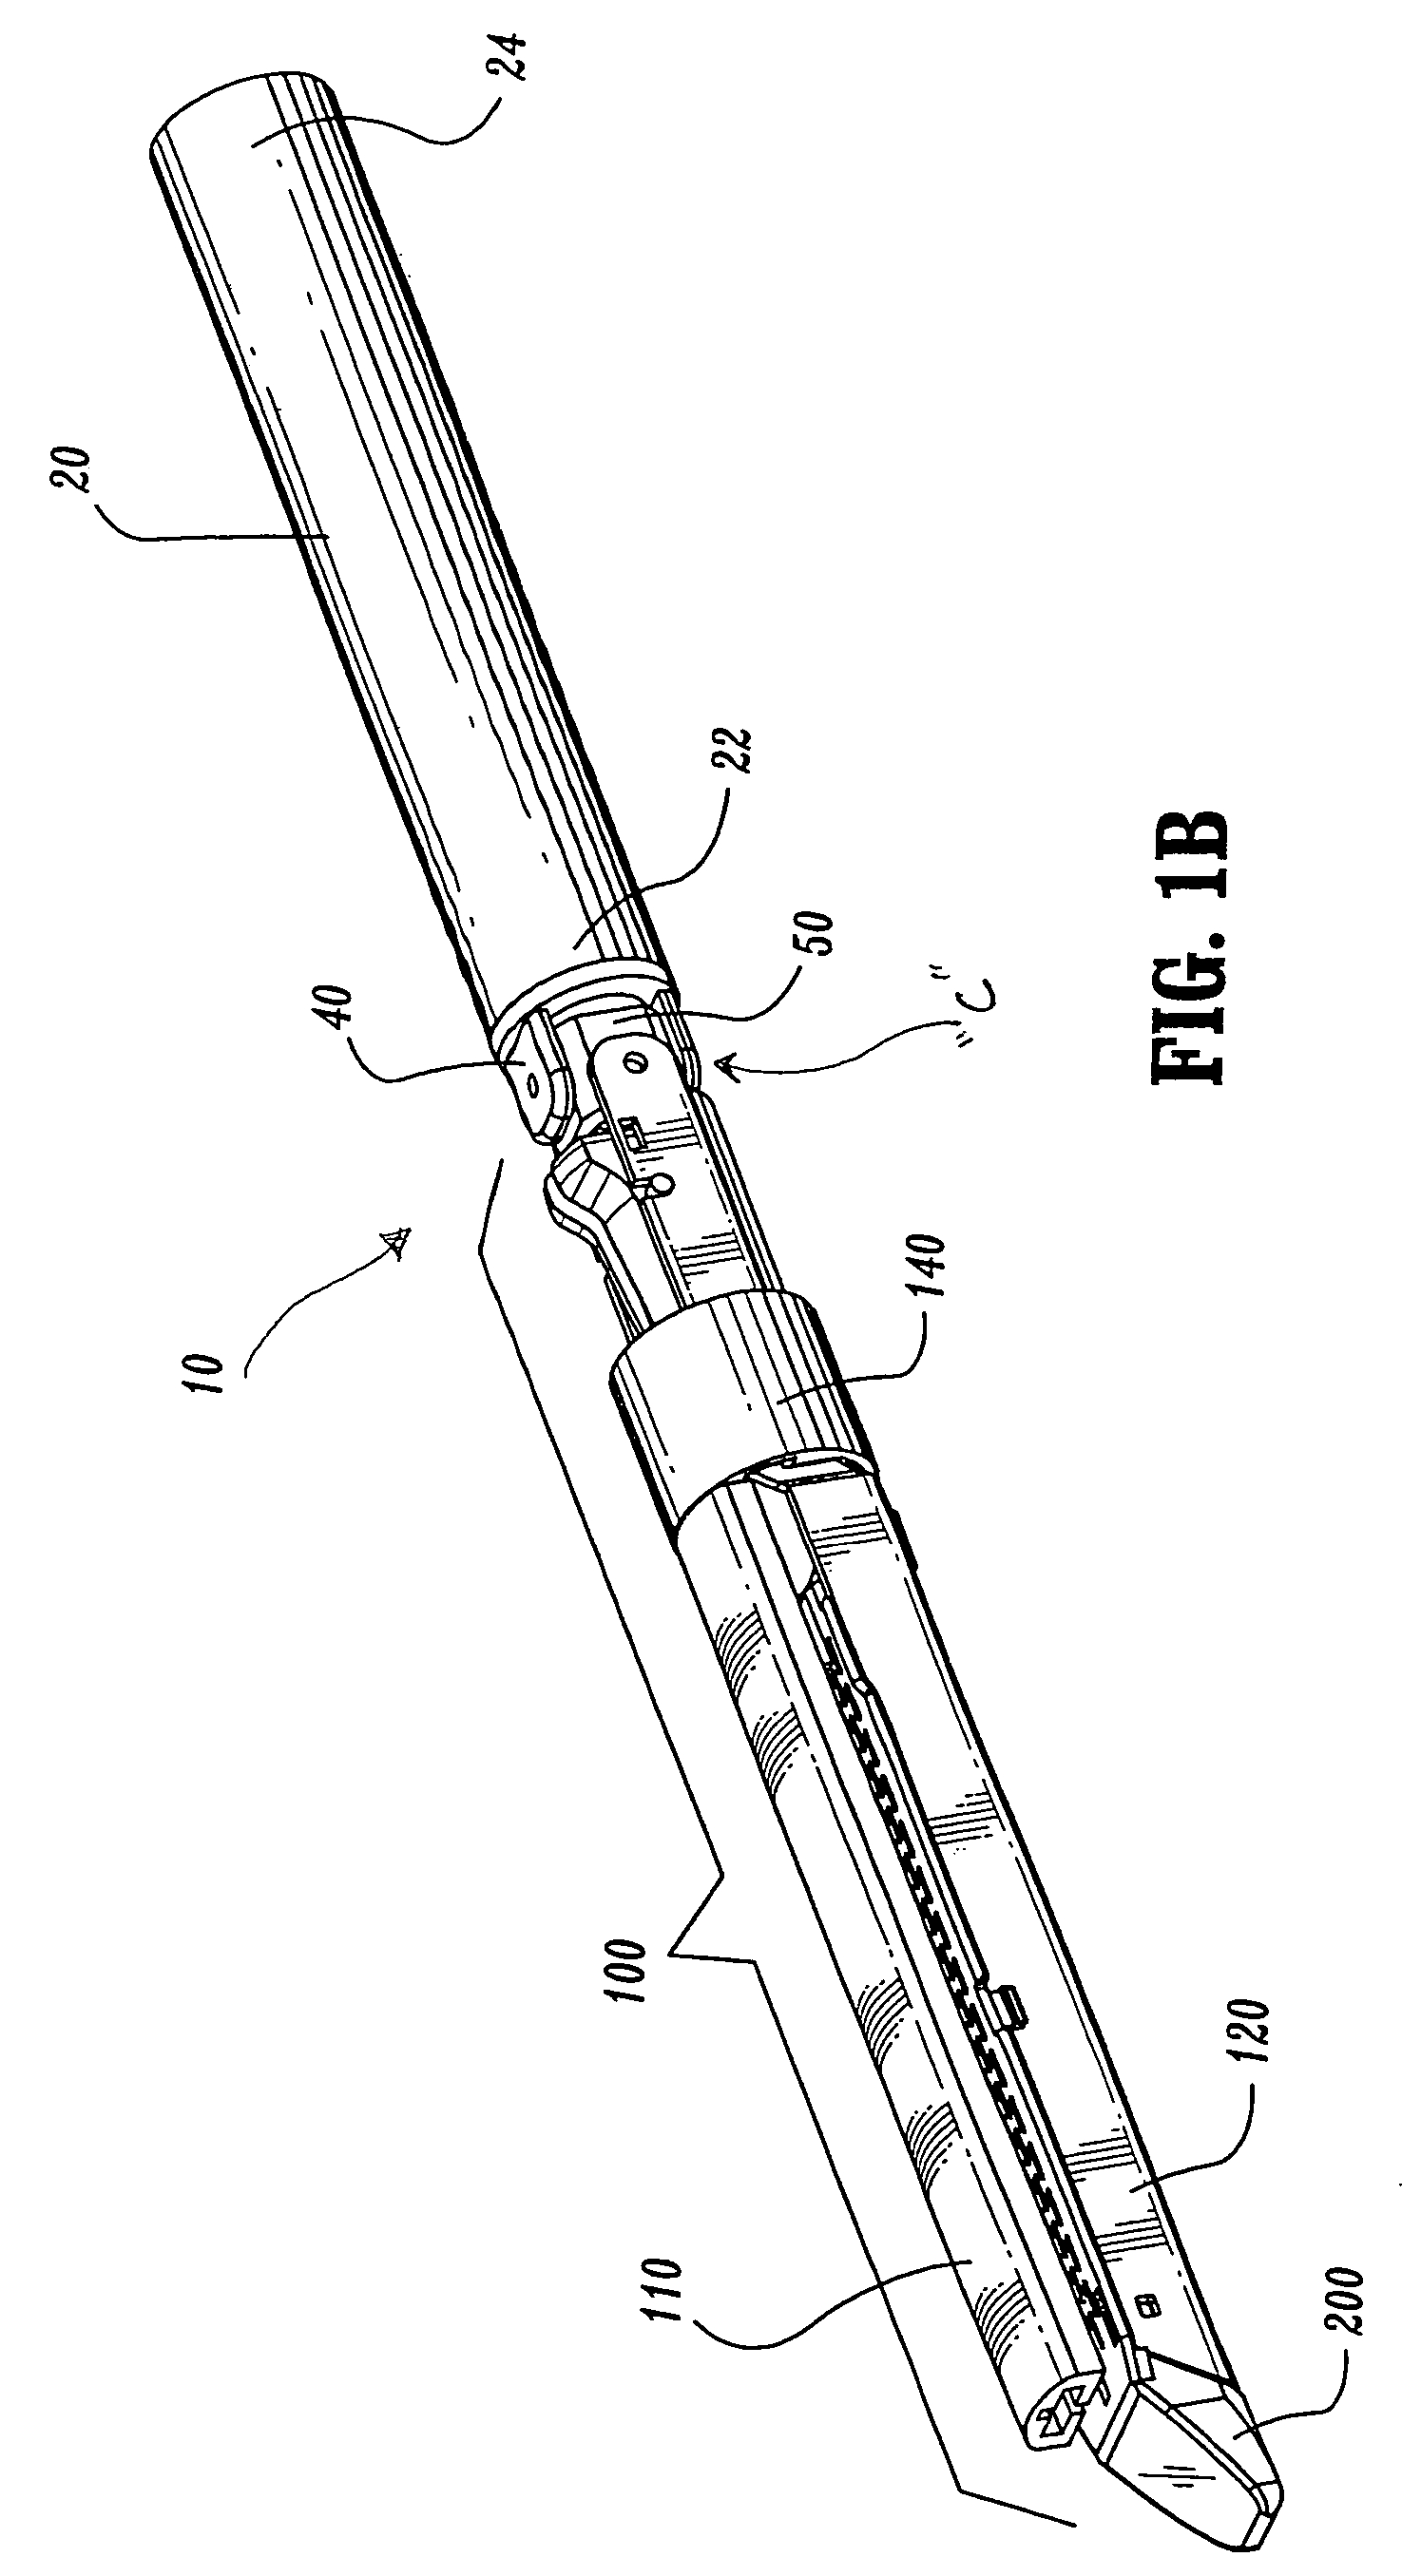 Surgical stapler with universal articulation and tissue pre-clamp